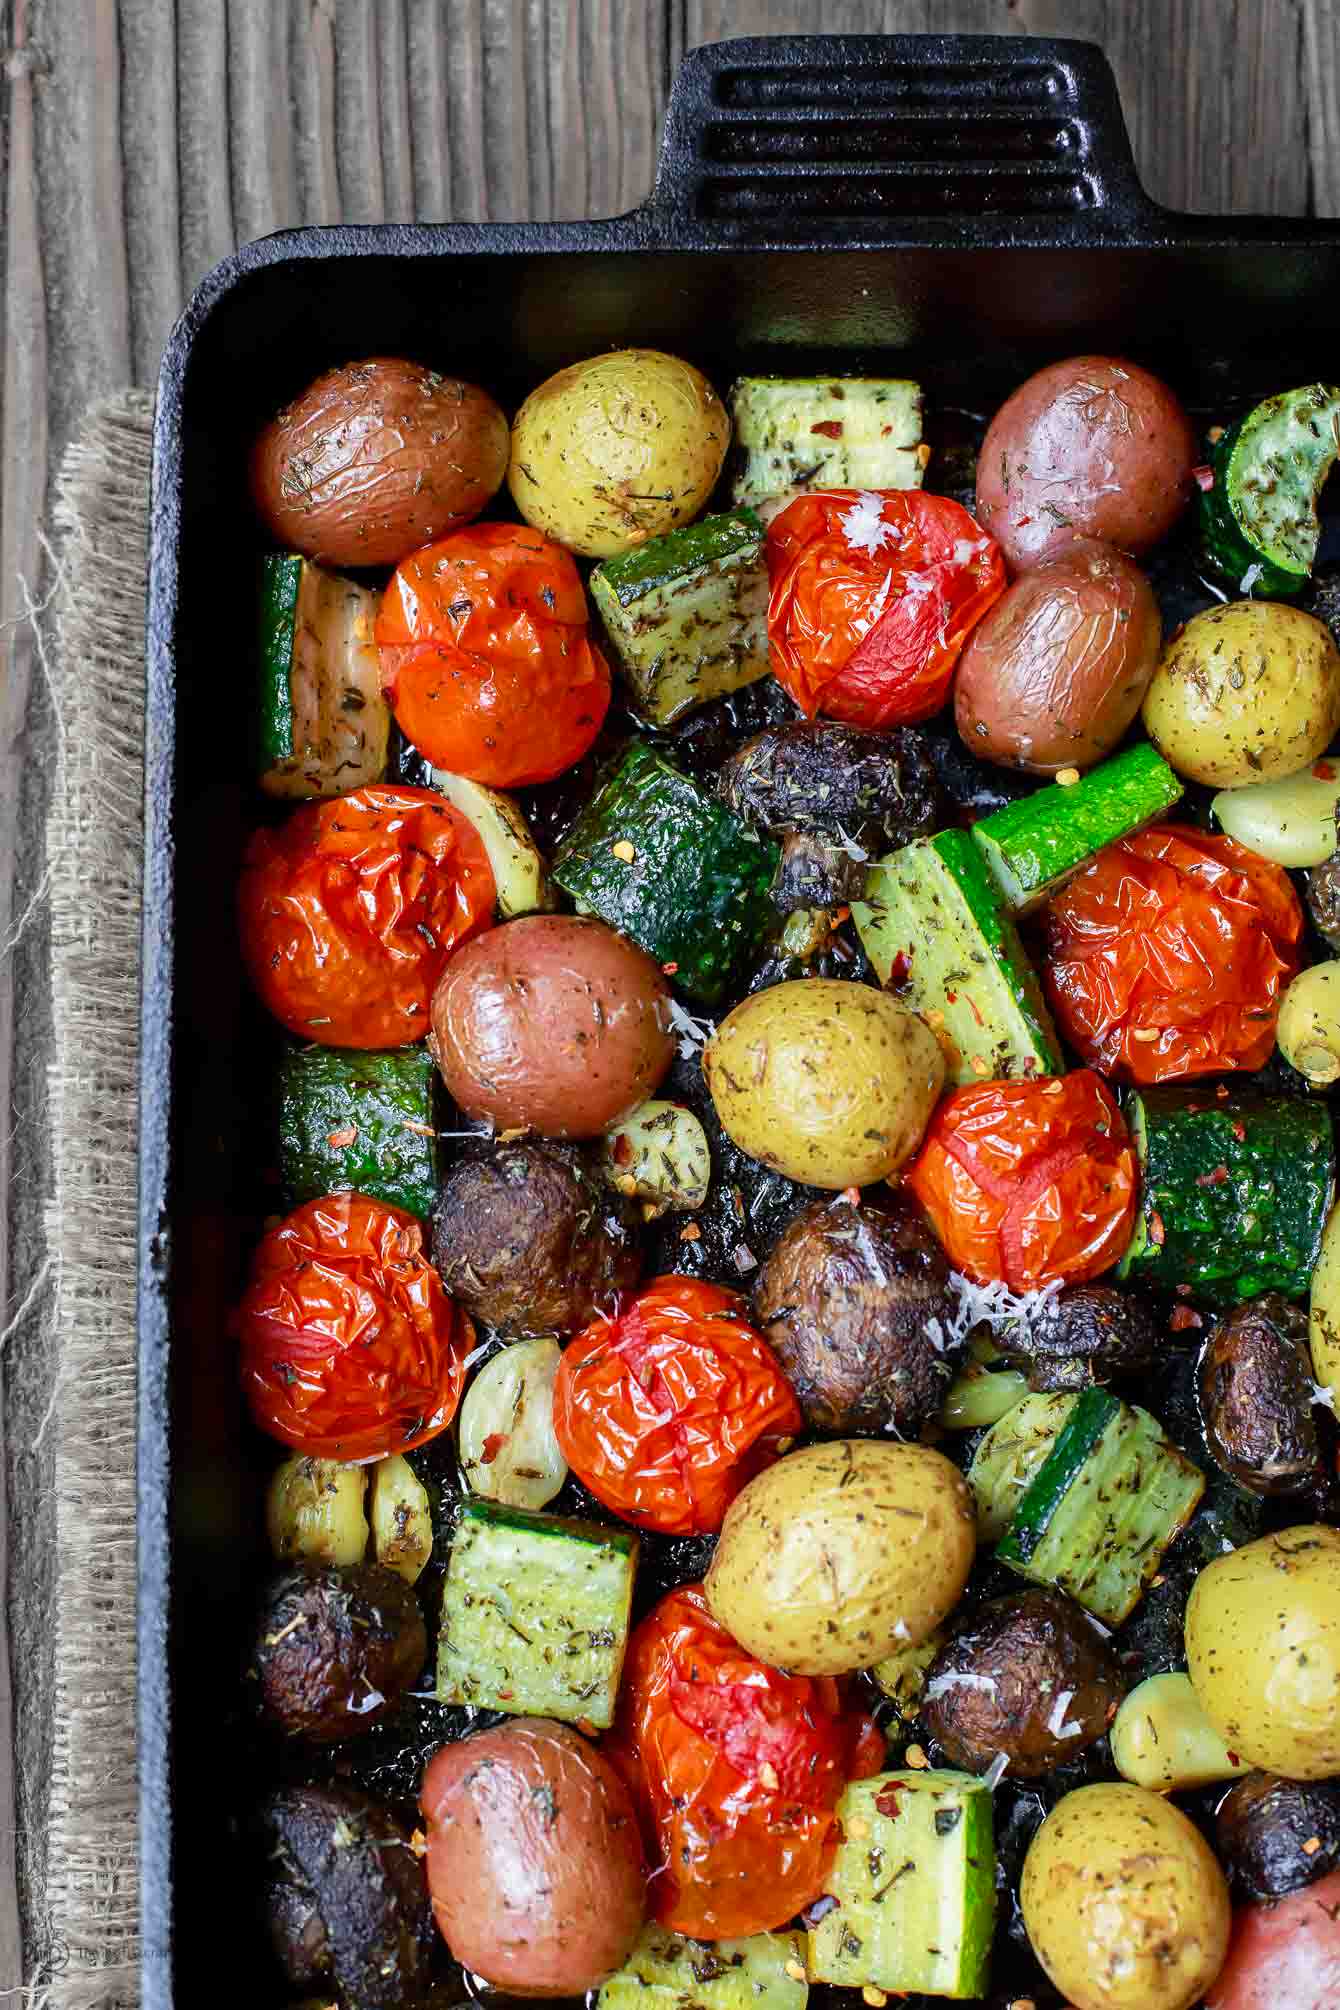 Italian Oven Roasted Vegetables Recipe (w/ Video)| The Mediterranean D